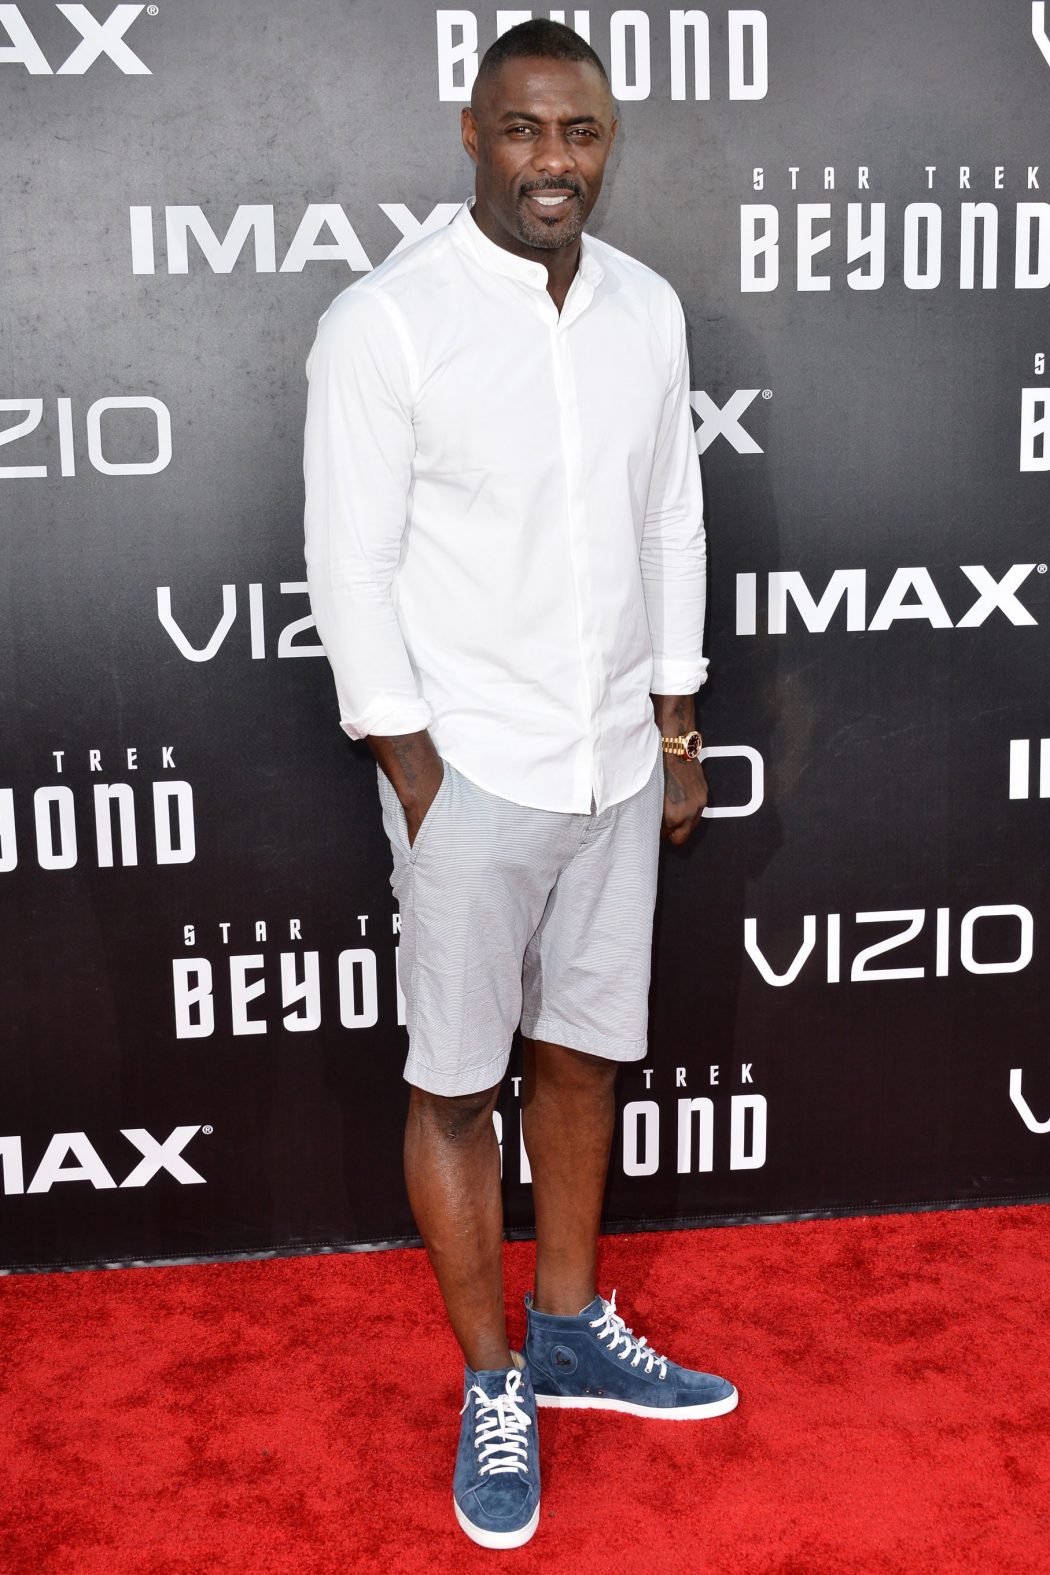 Idris Elba Style 2016 07 20 16 15 Male Celebrities Fashion Trends for Summer - 12